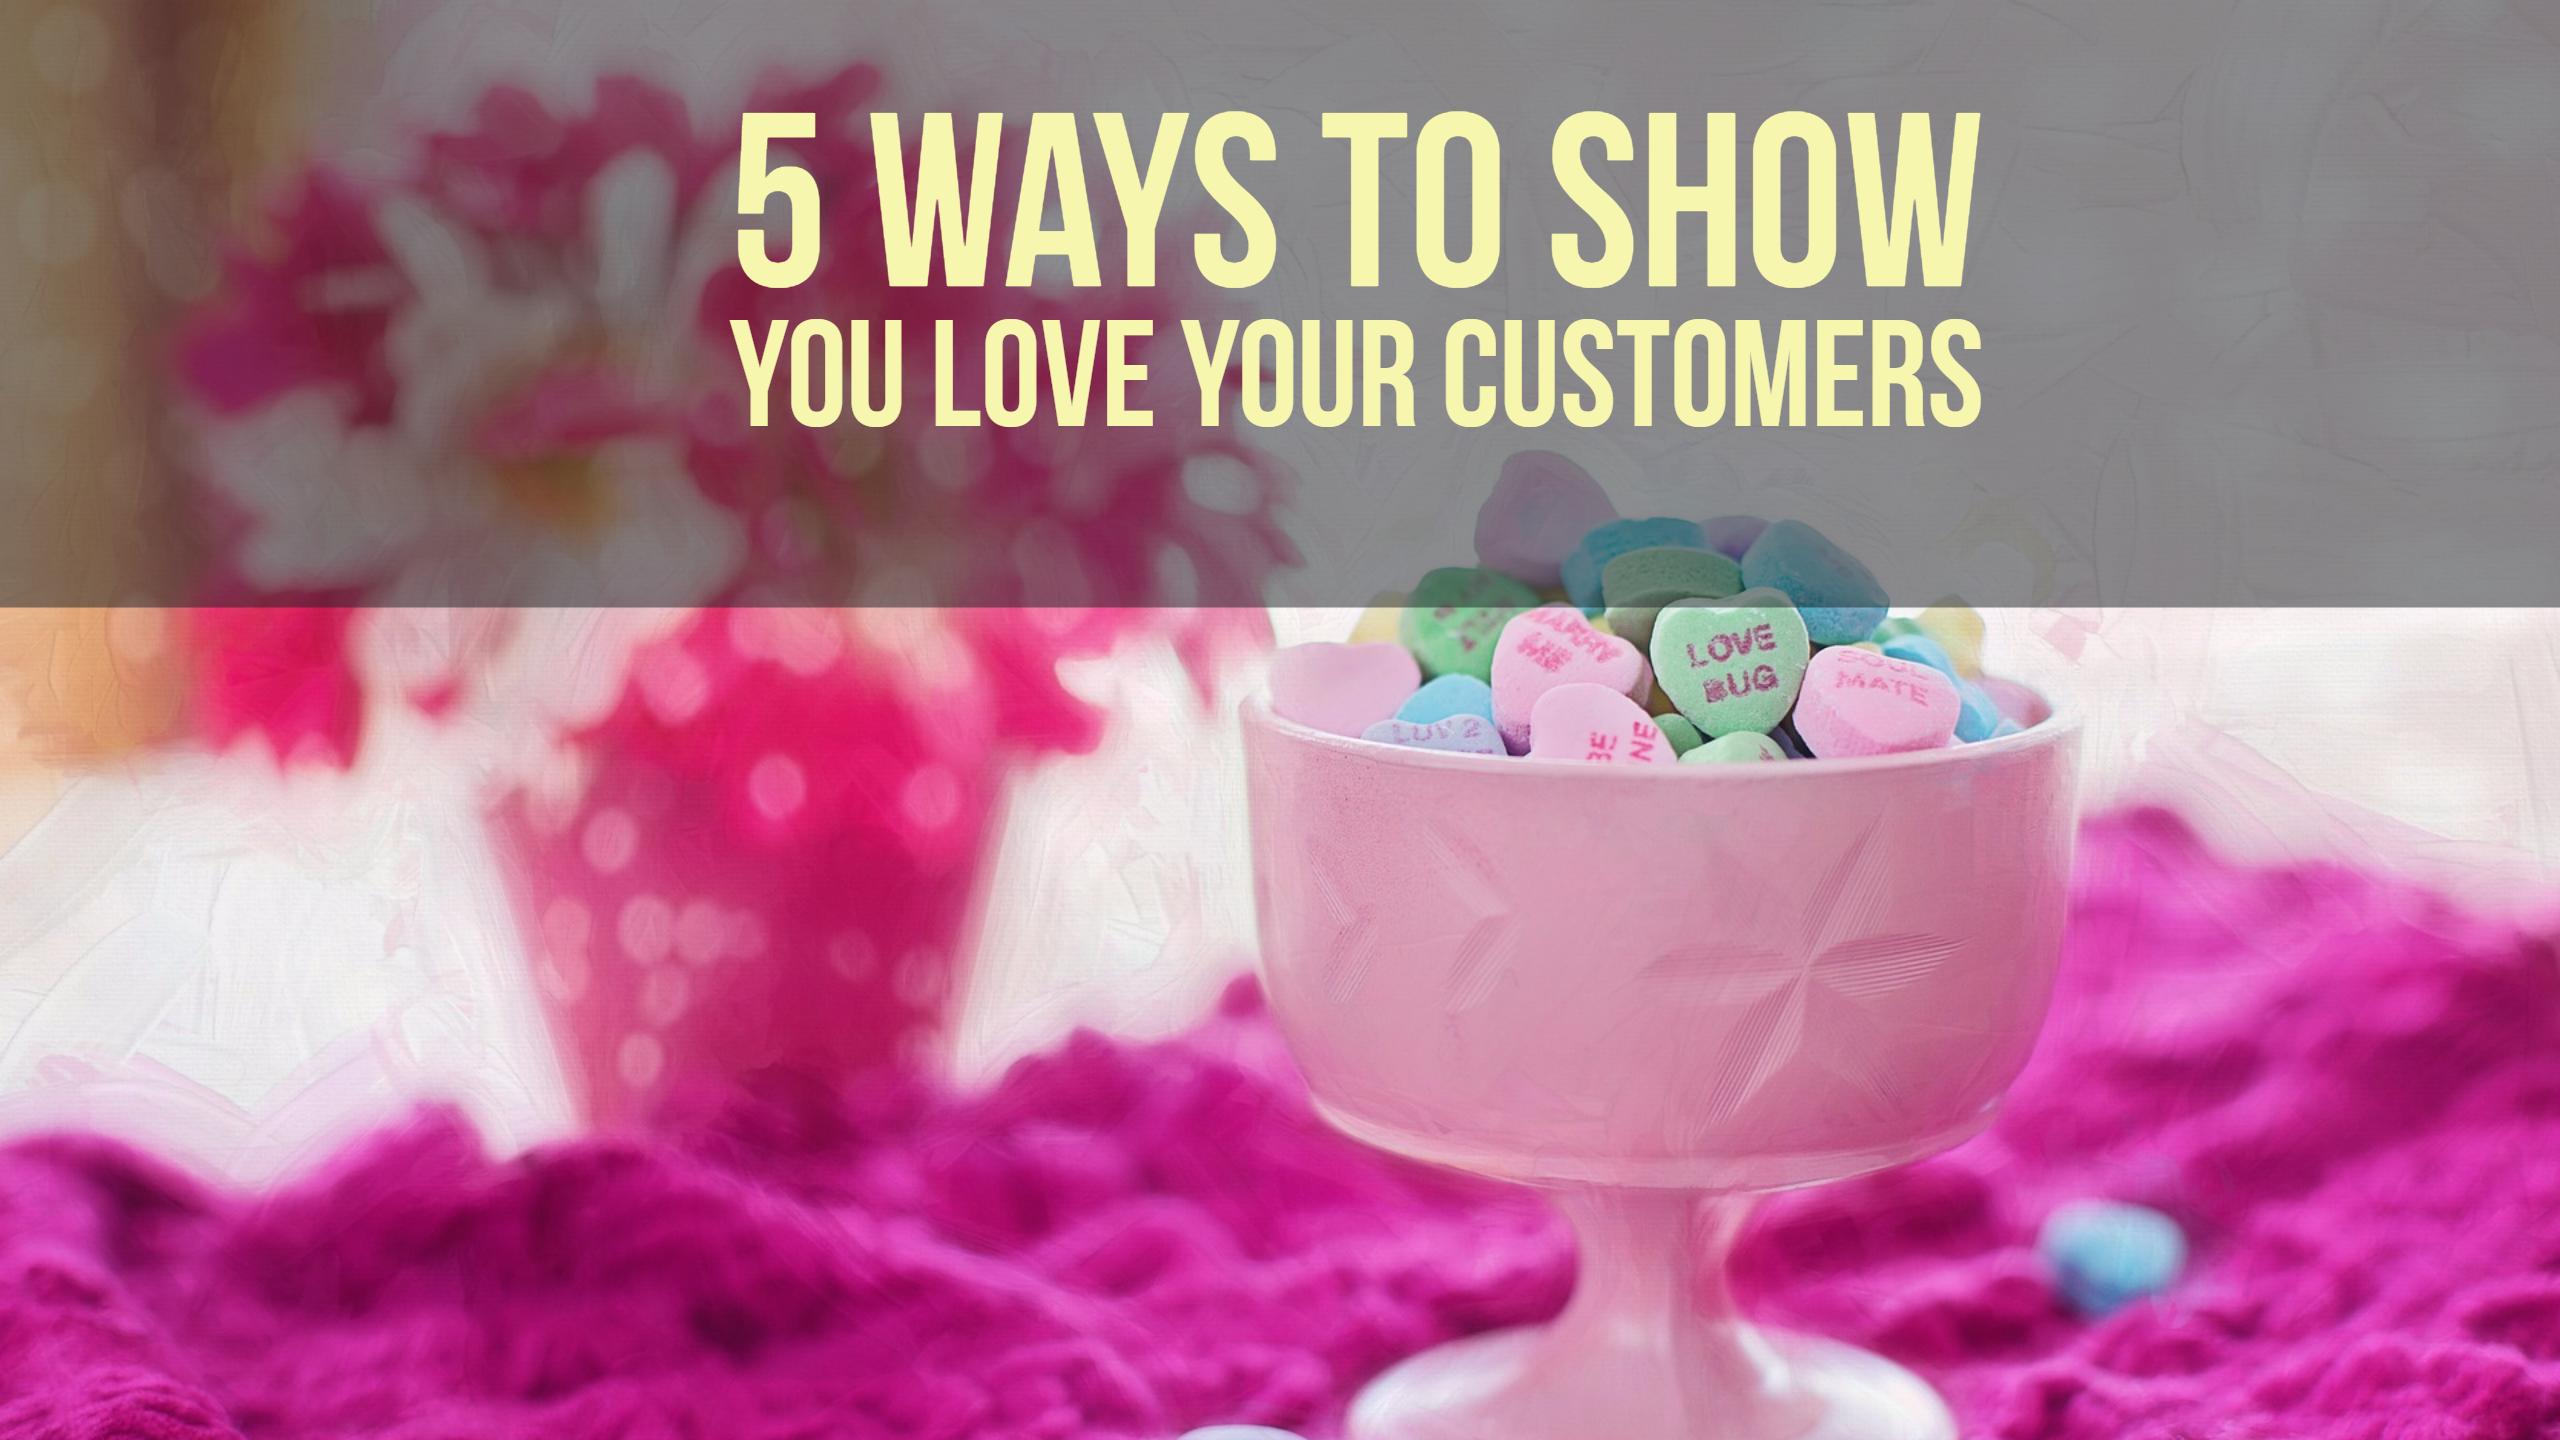 5 Ways to Show You Love Your Customers